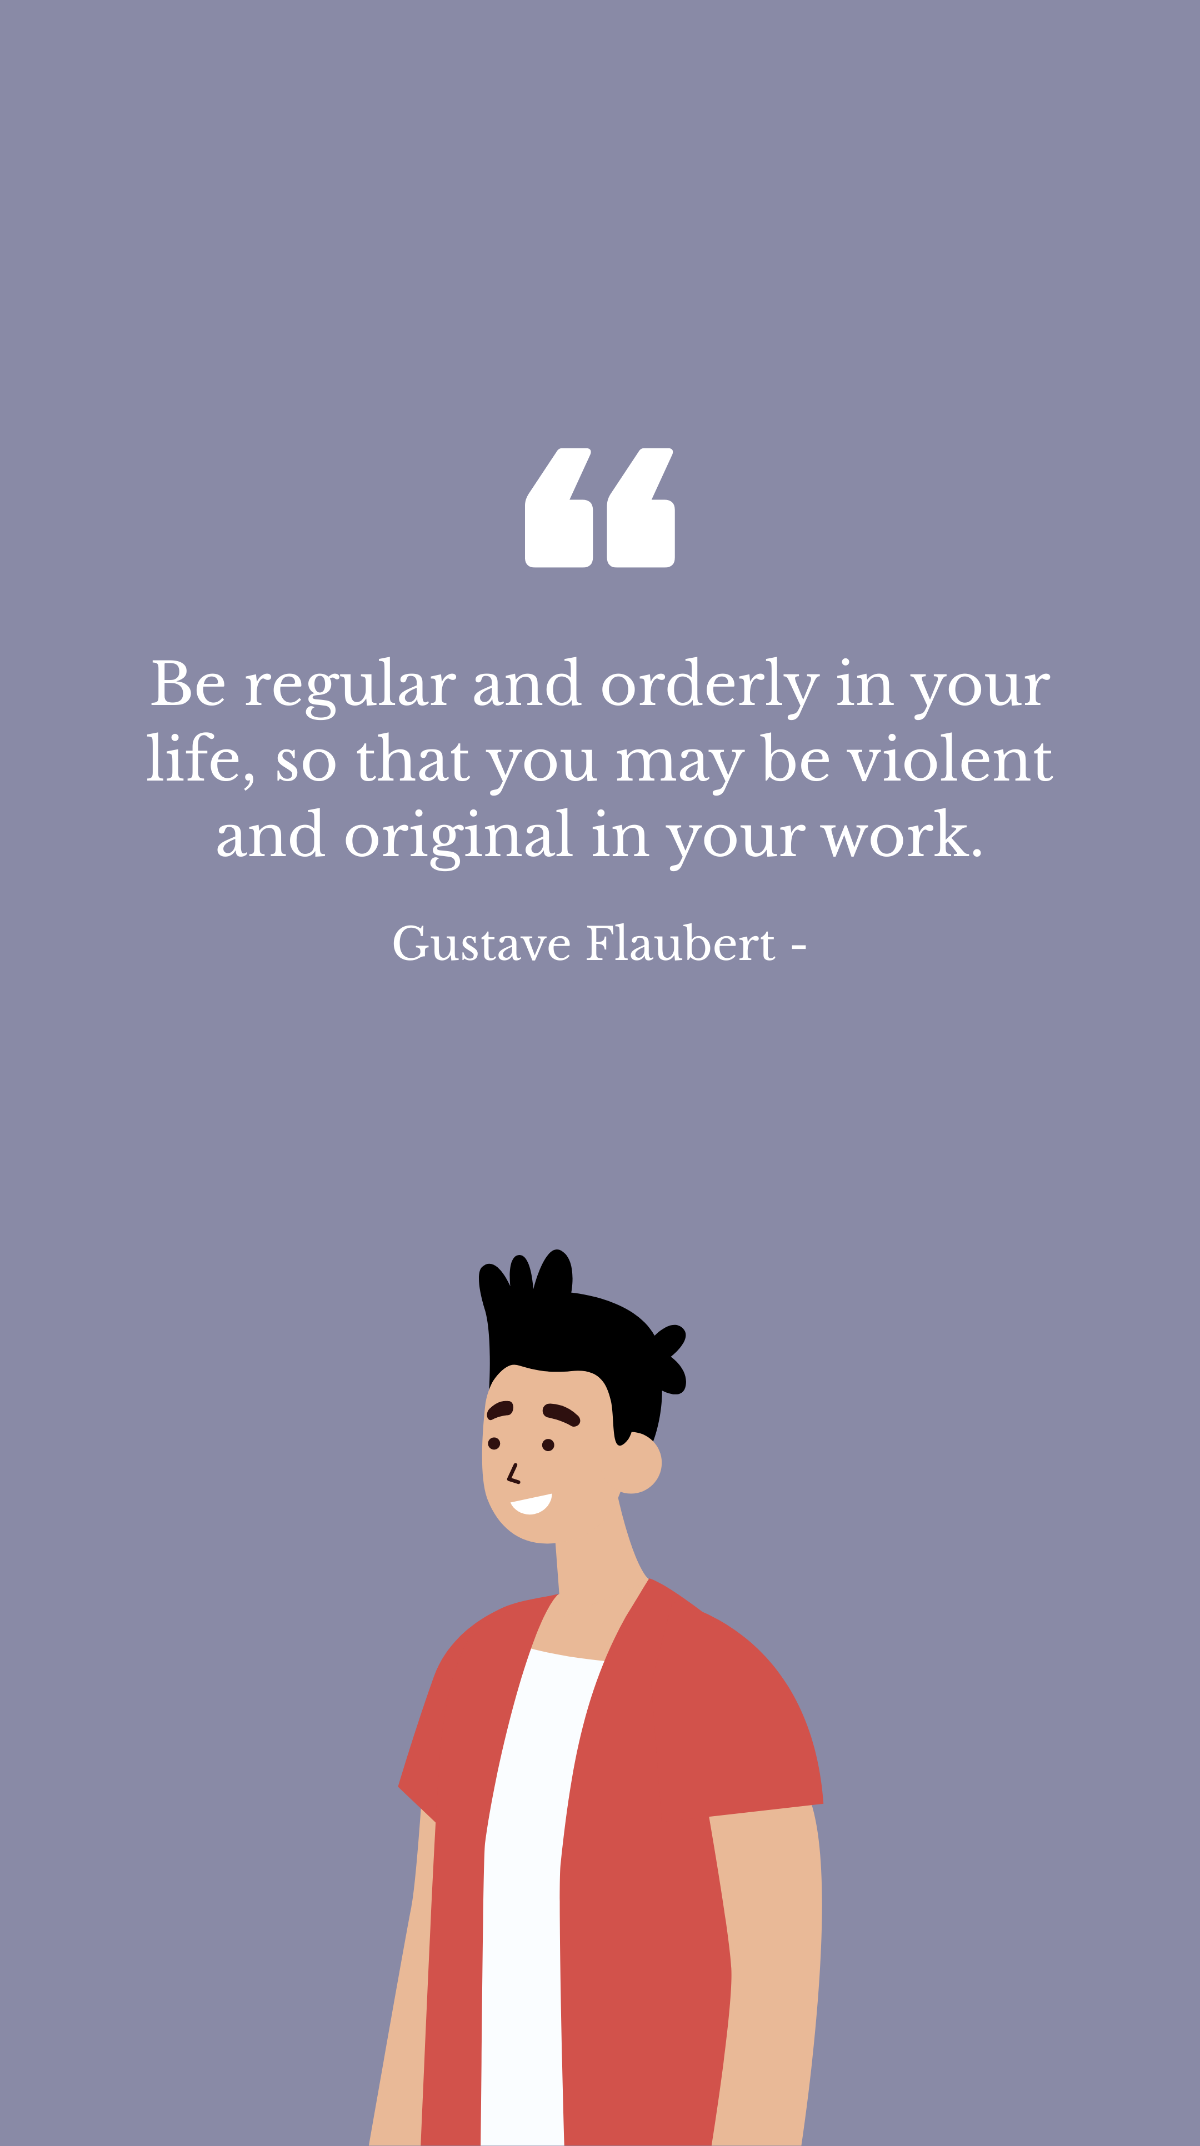 Gustave Flaubert - Be regular and orderly in your life, so that you may be violent and original in your work.